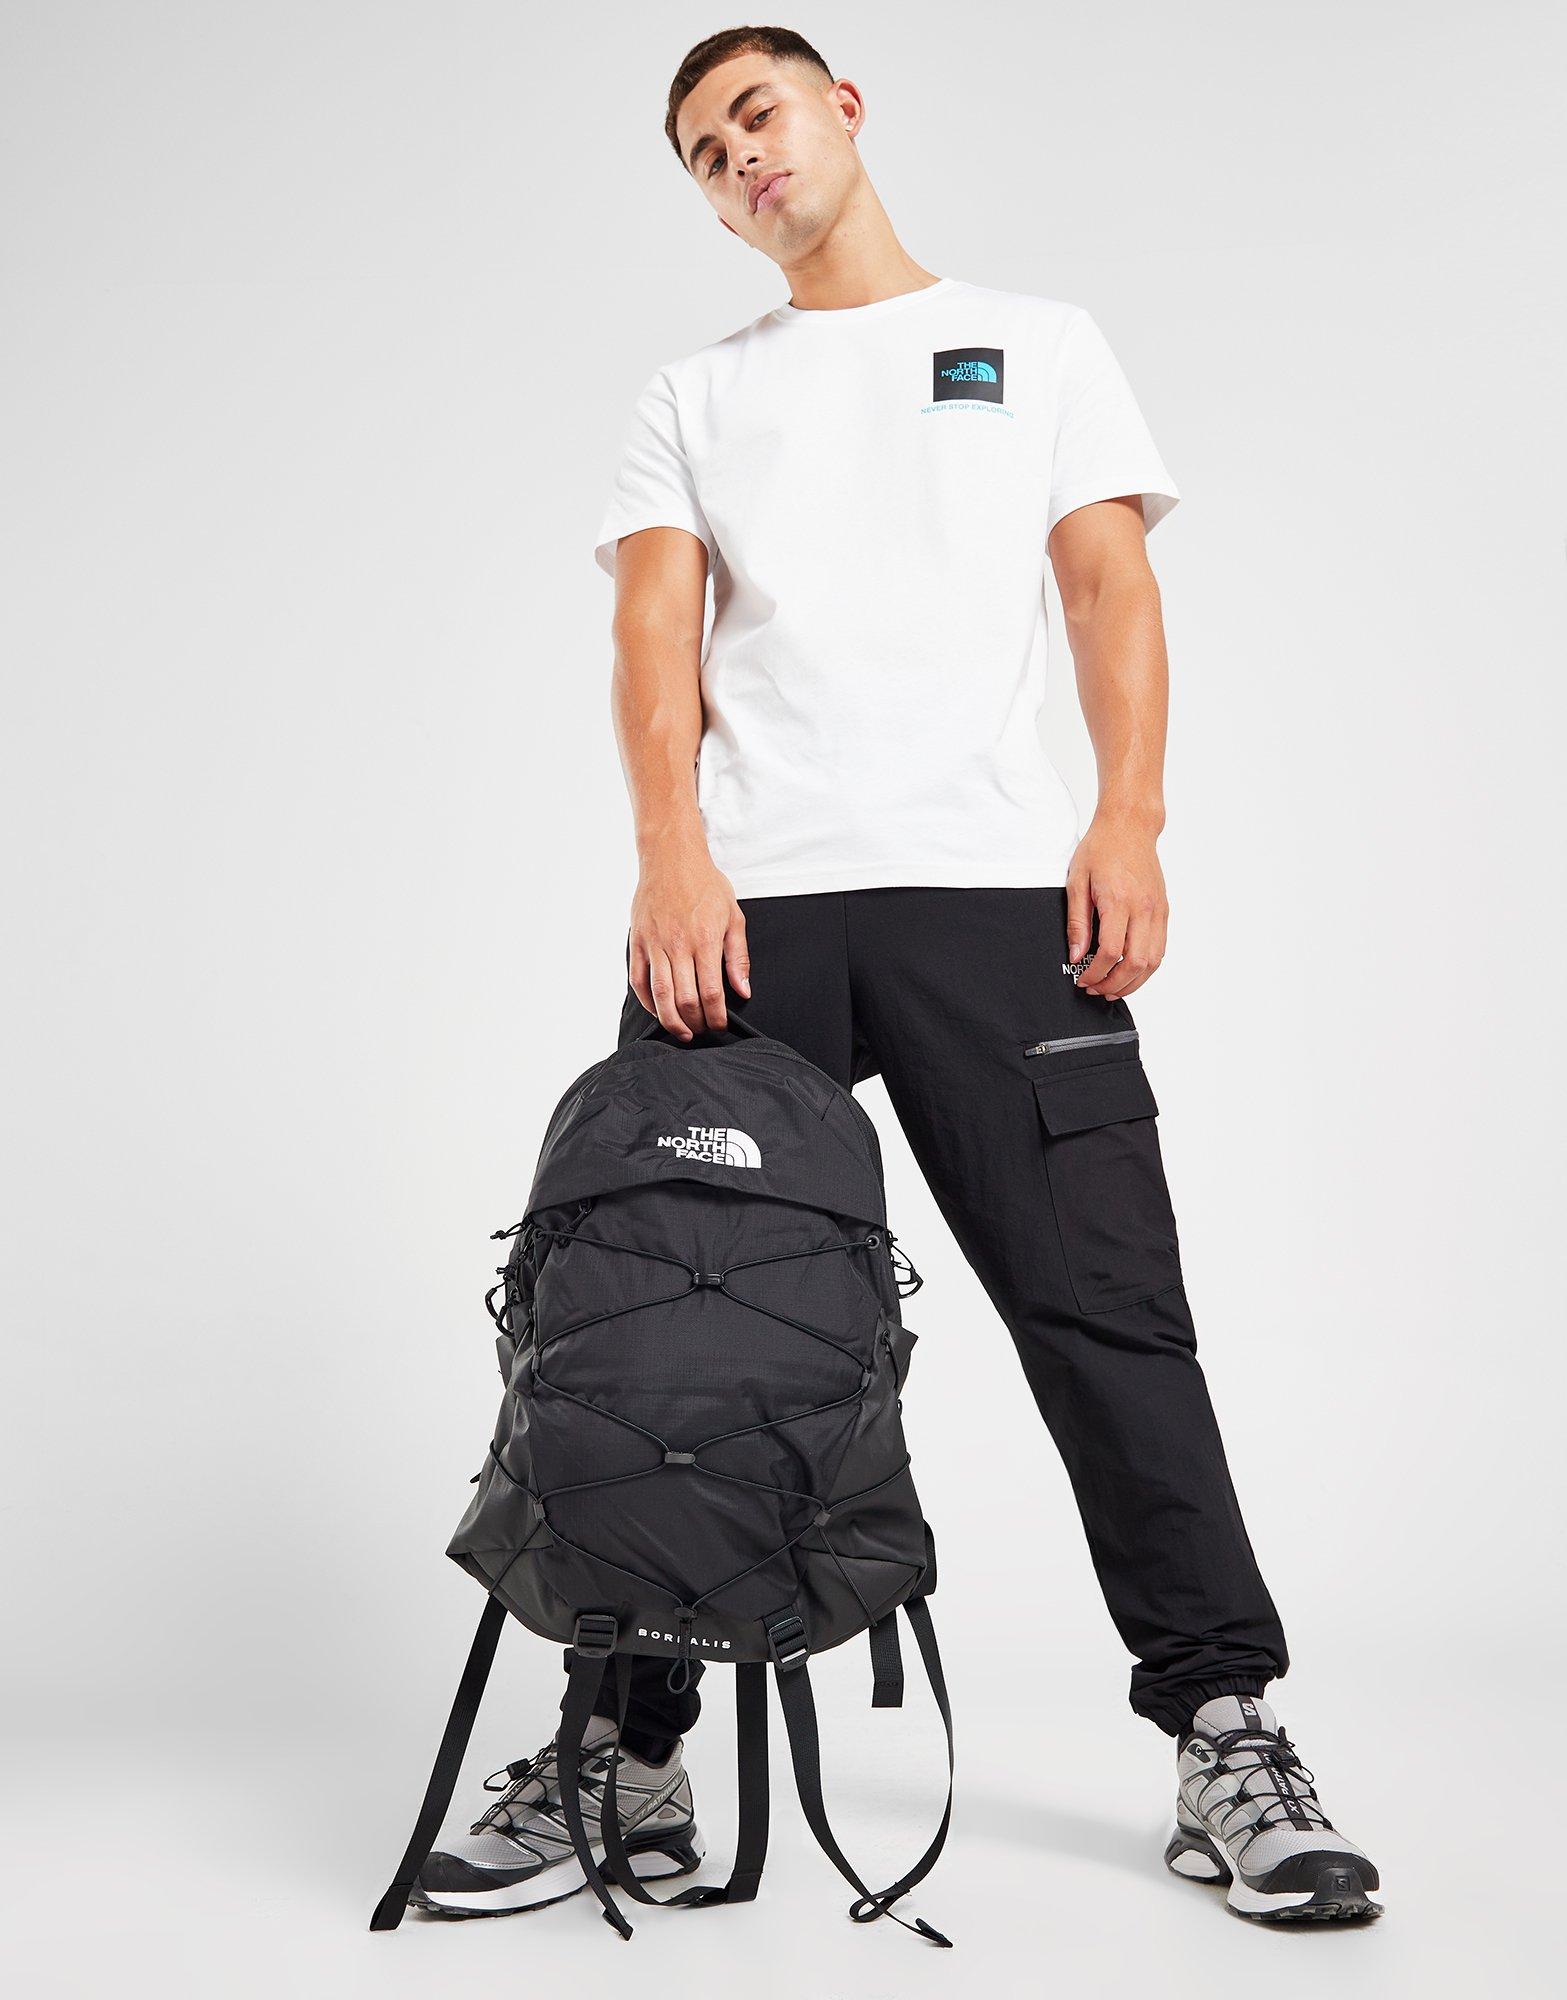 north face backpack jd